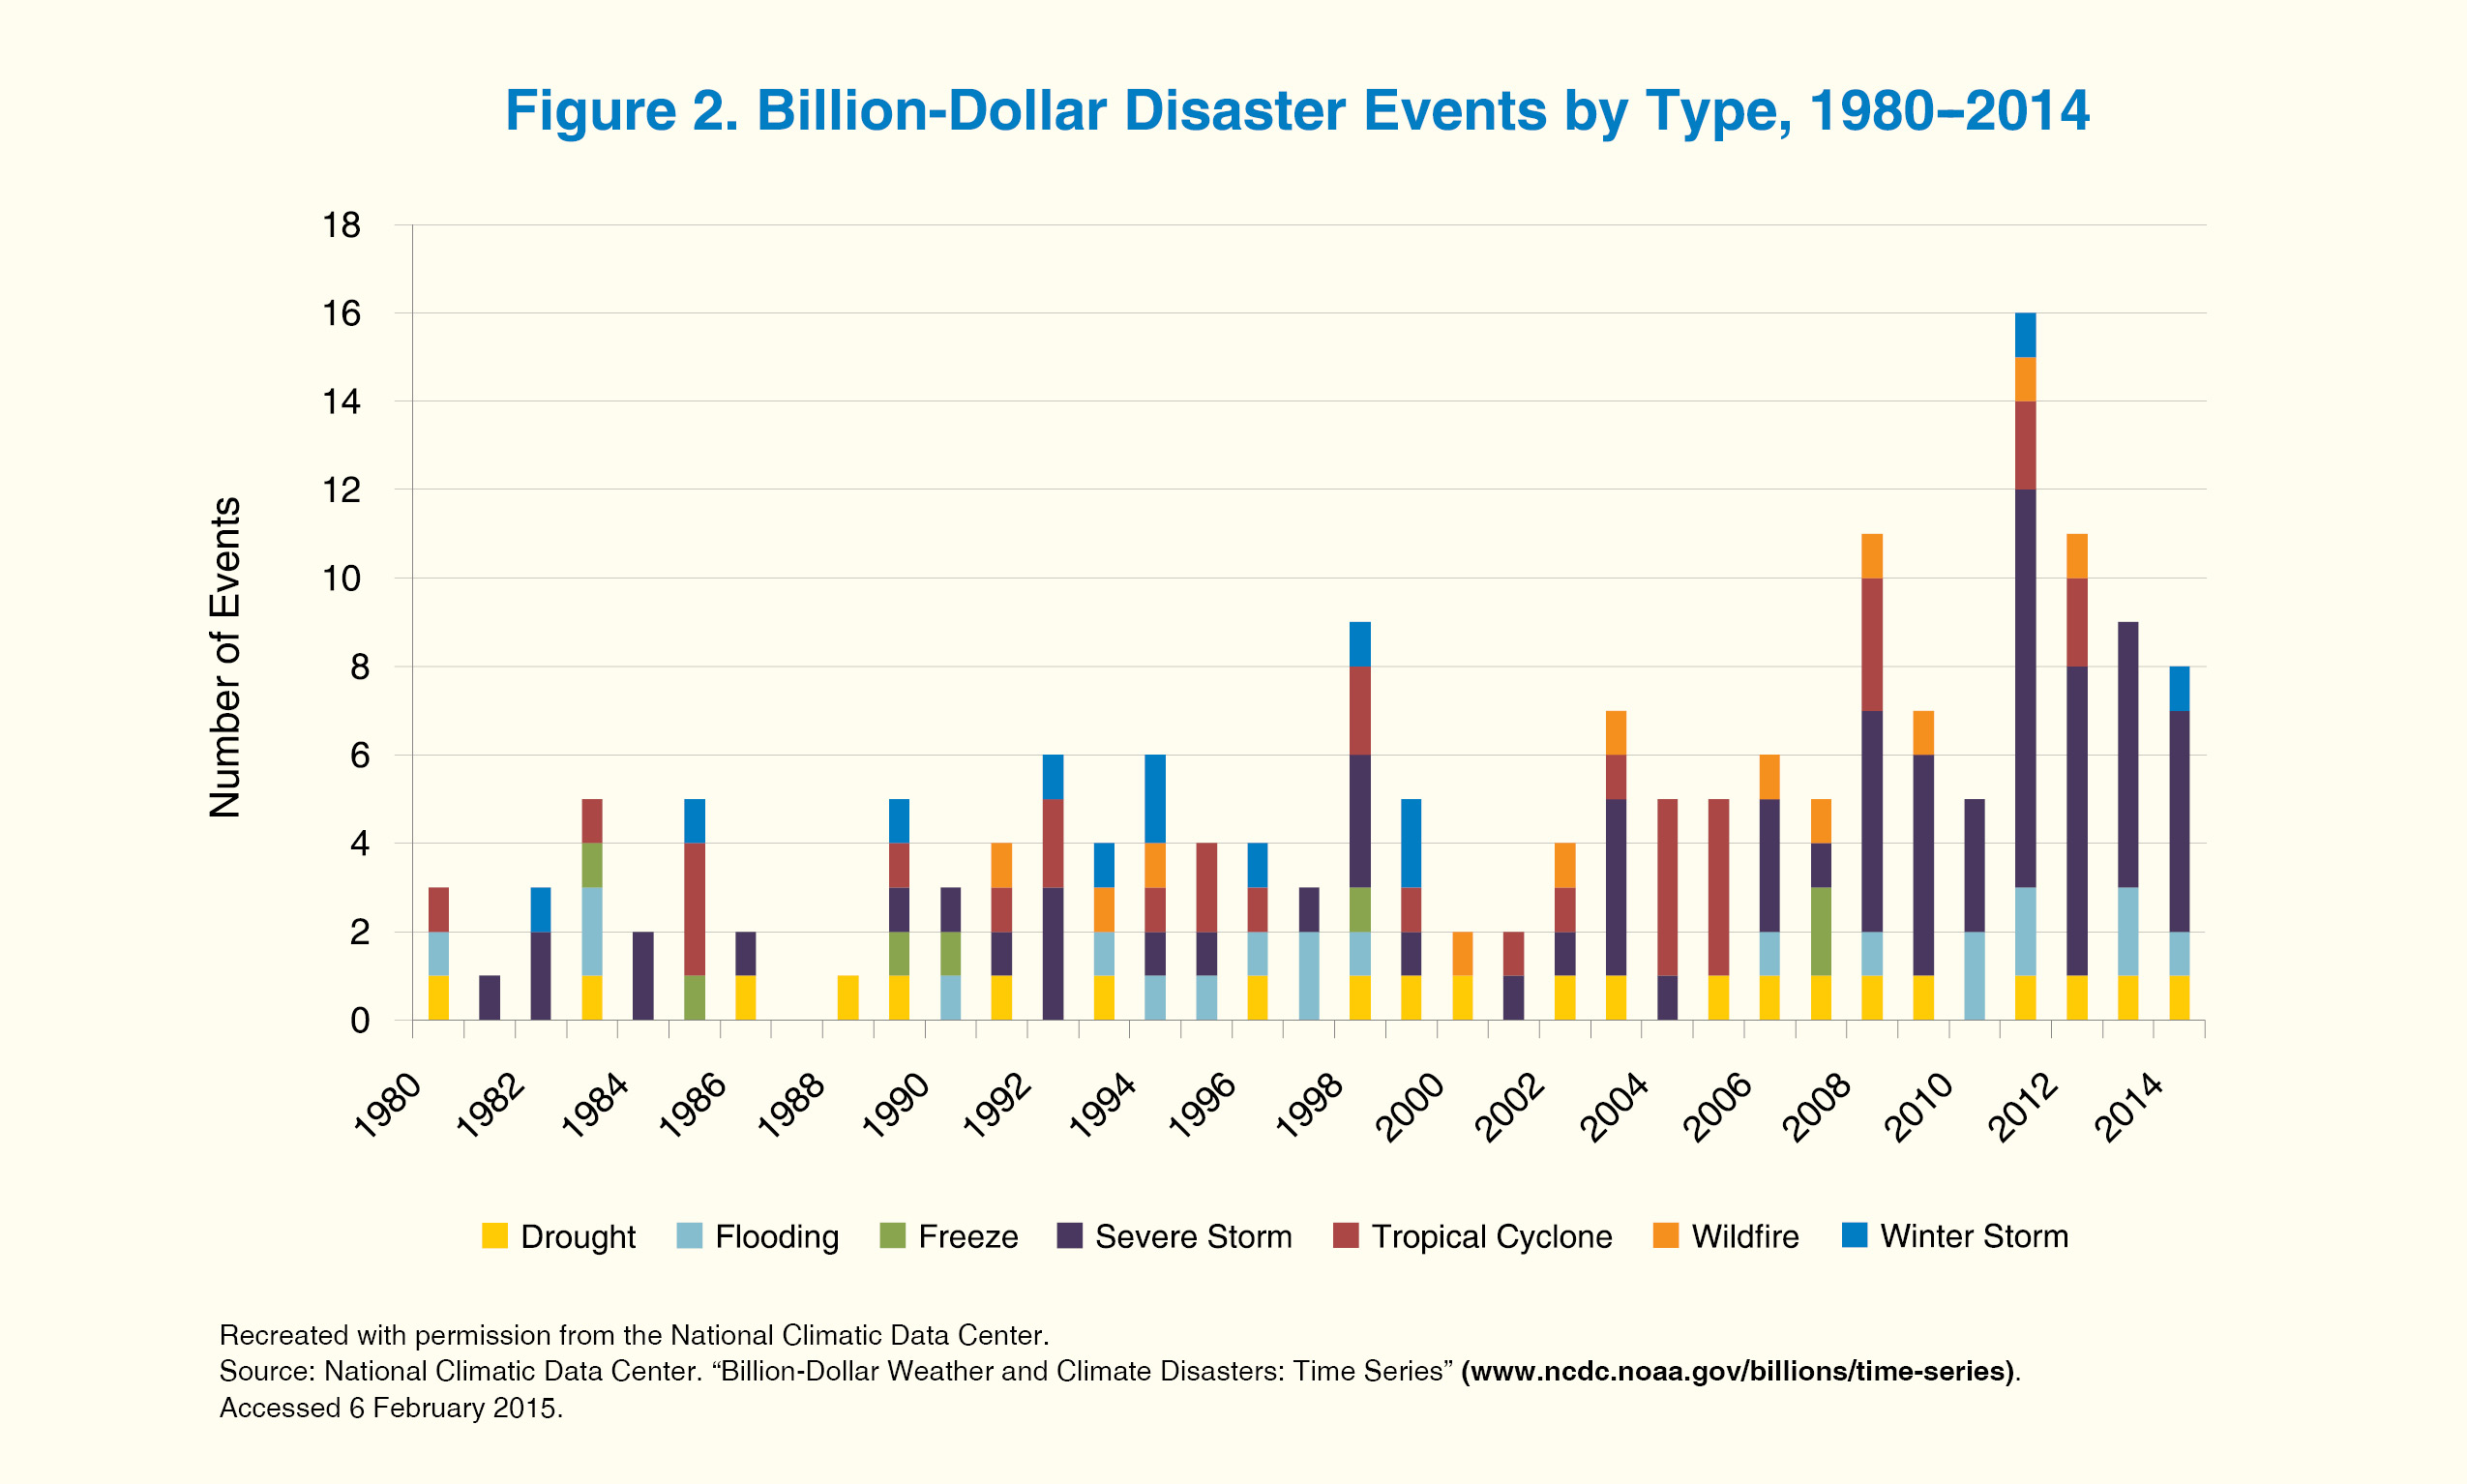 A bar chart showing number of billion dollar disaster events by type from 1980 to 2014.